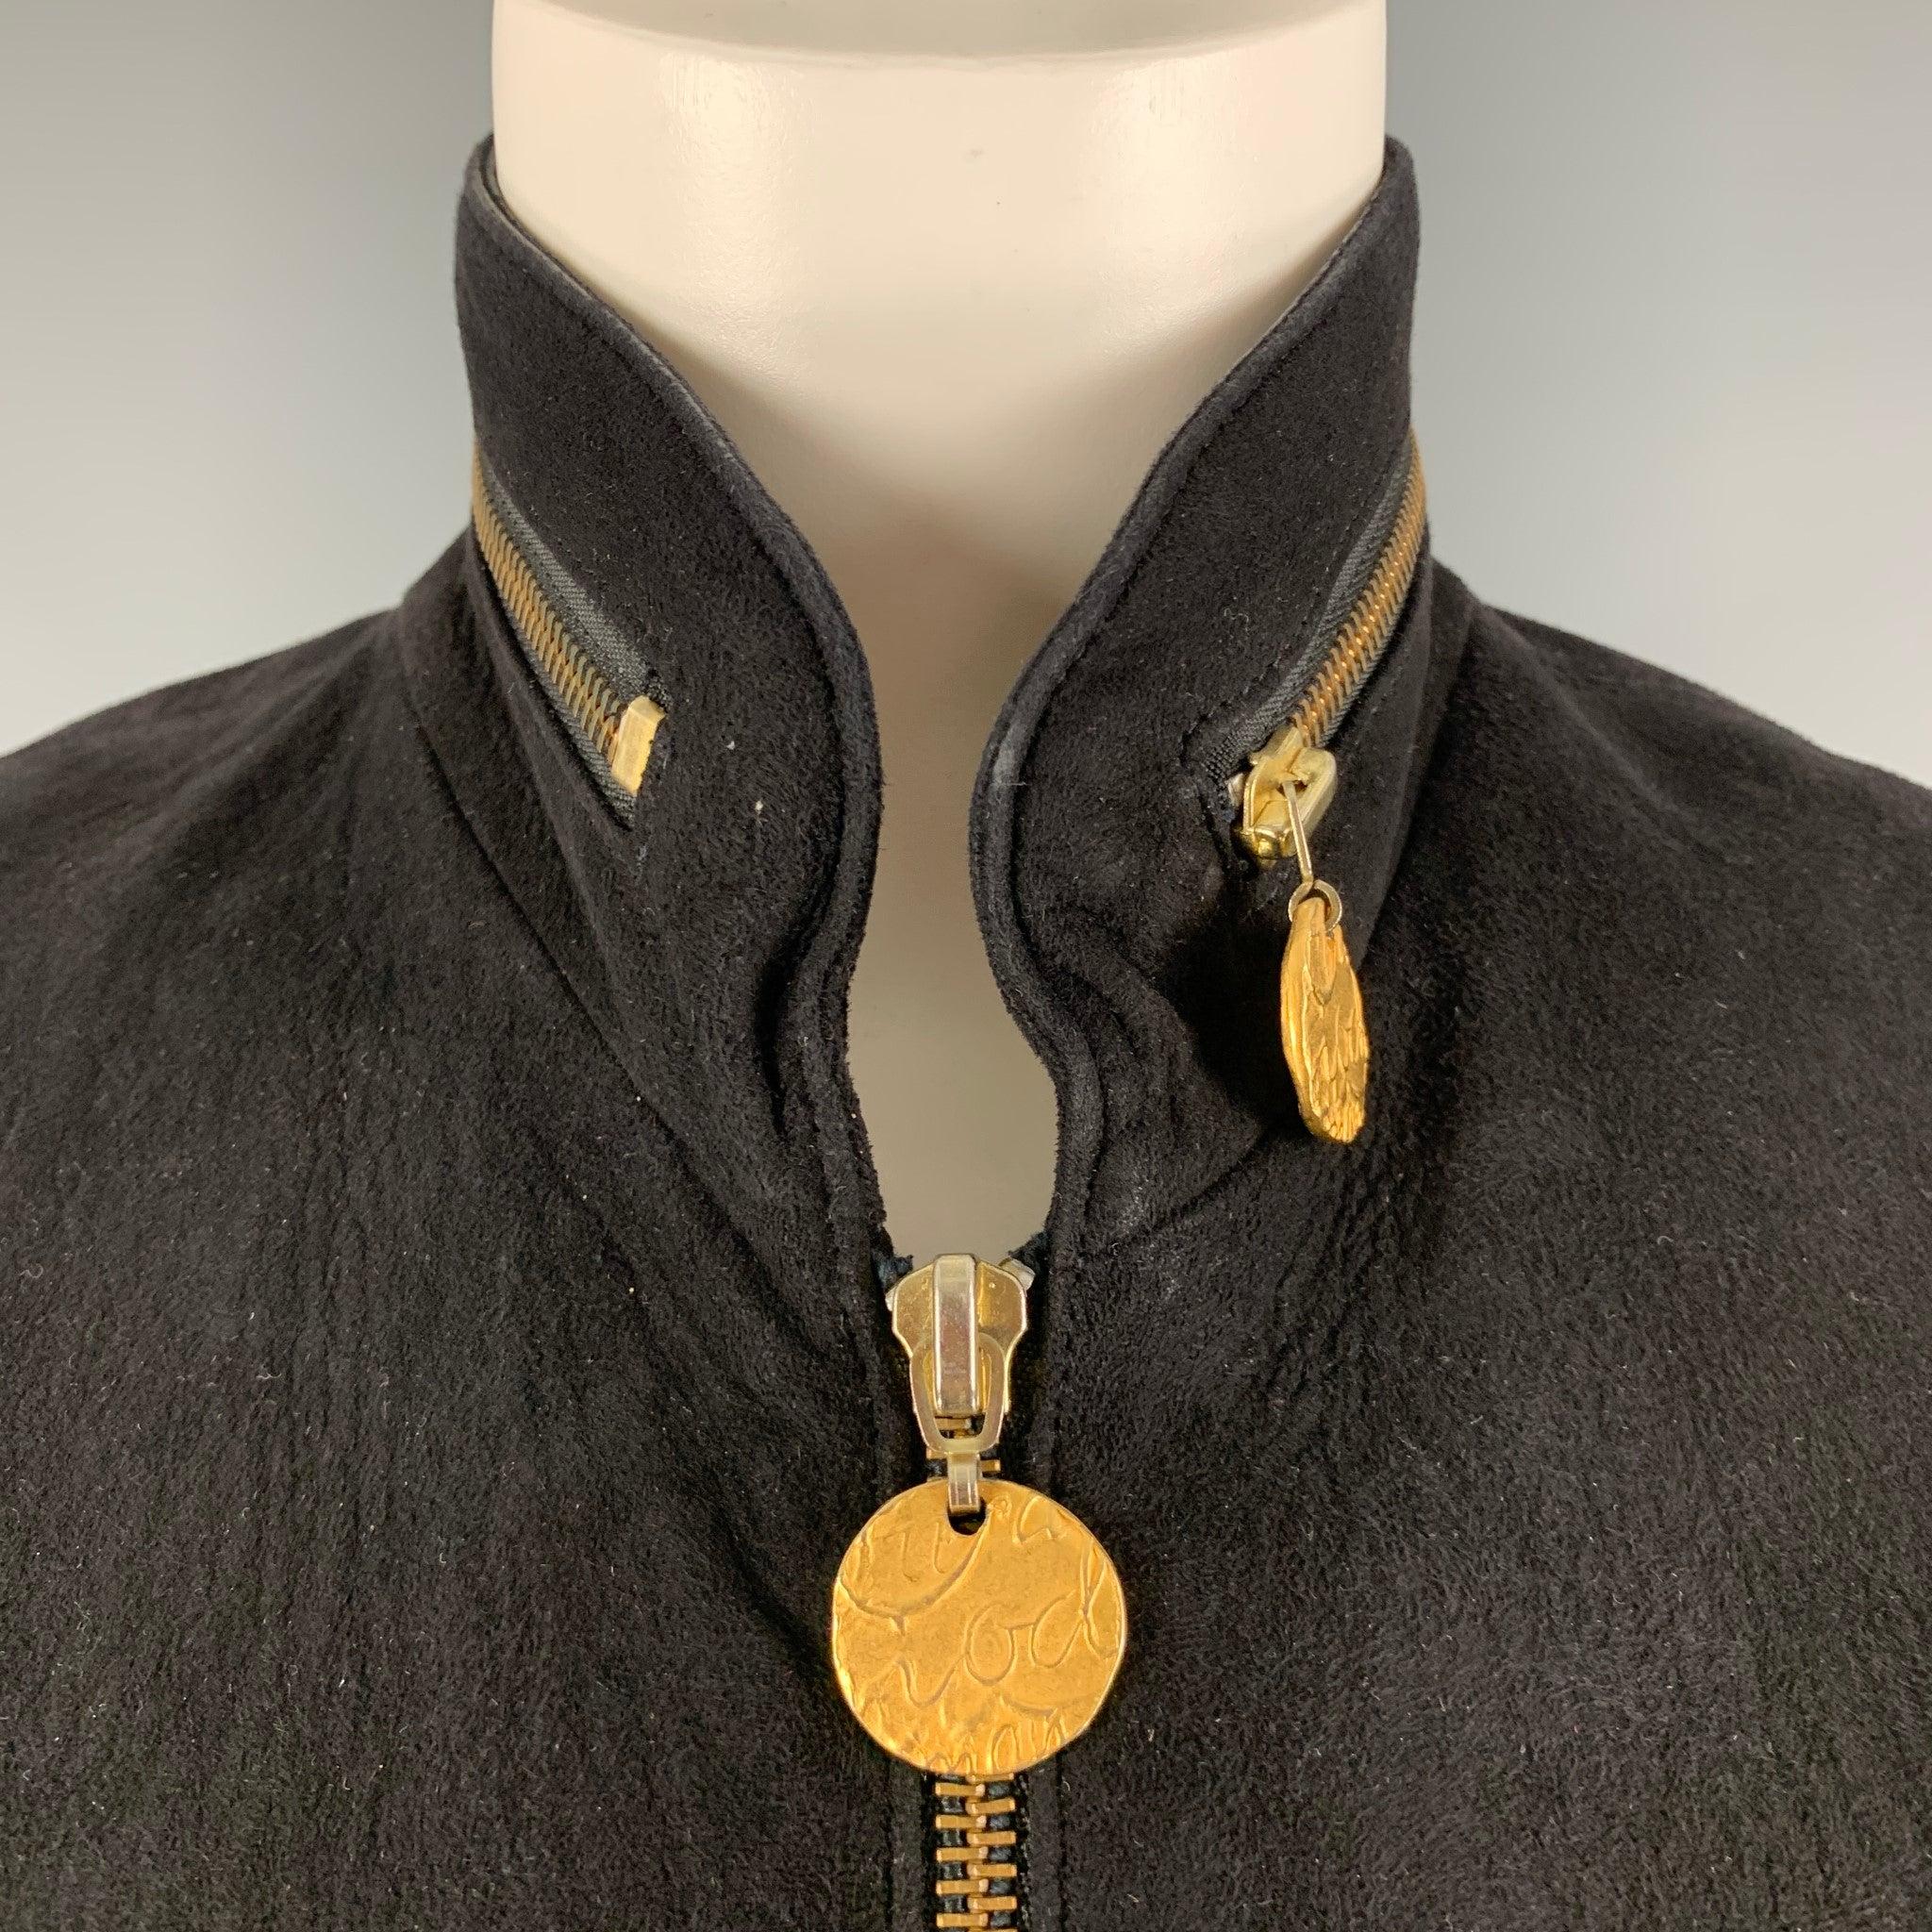 DONNA KARAN vest comes in a black suede material featuring zipper details, and gold hardware. Very Good Pre-Owned Condition. Minor signs of wear. 

Marked:   S 

Measurements: 
 
Shoulder: 12 inches Bust: 36 inches Length: 20 inches  

  
  
